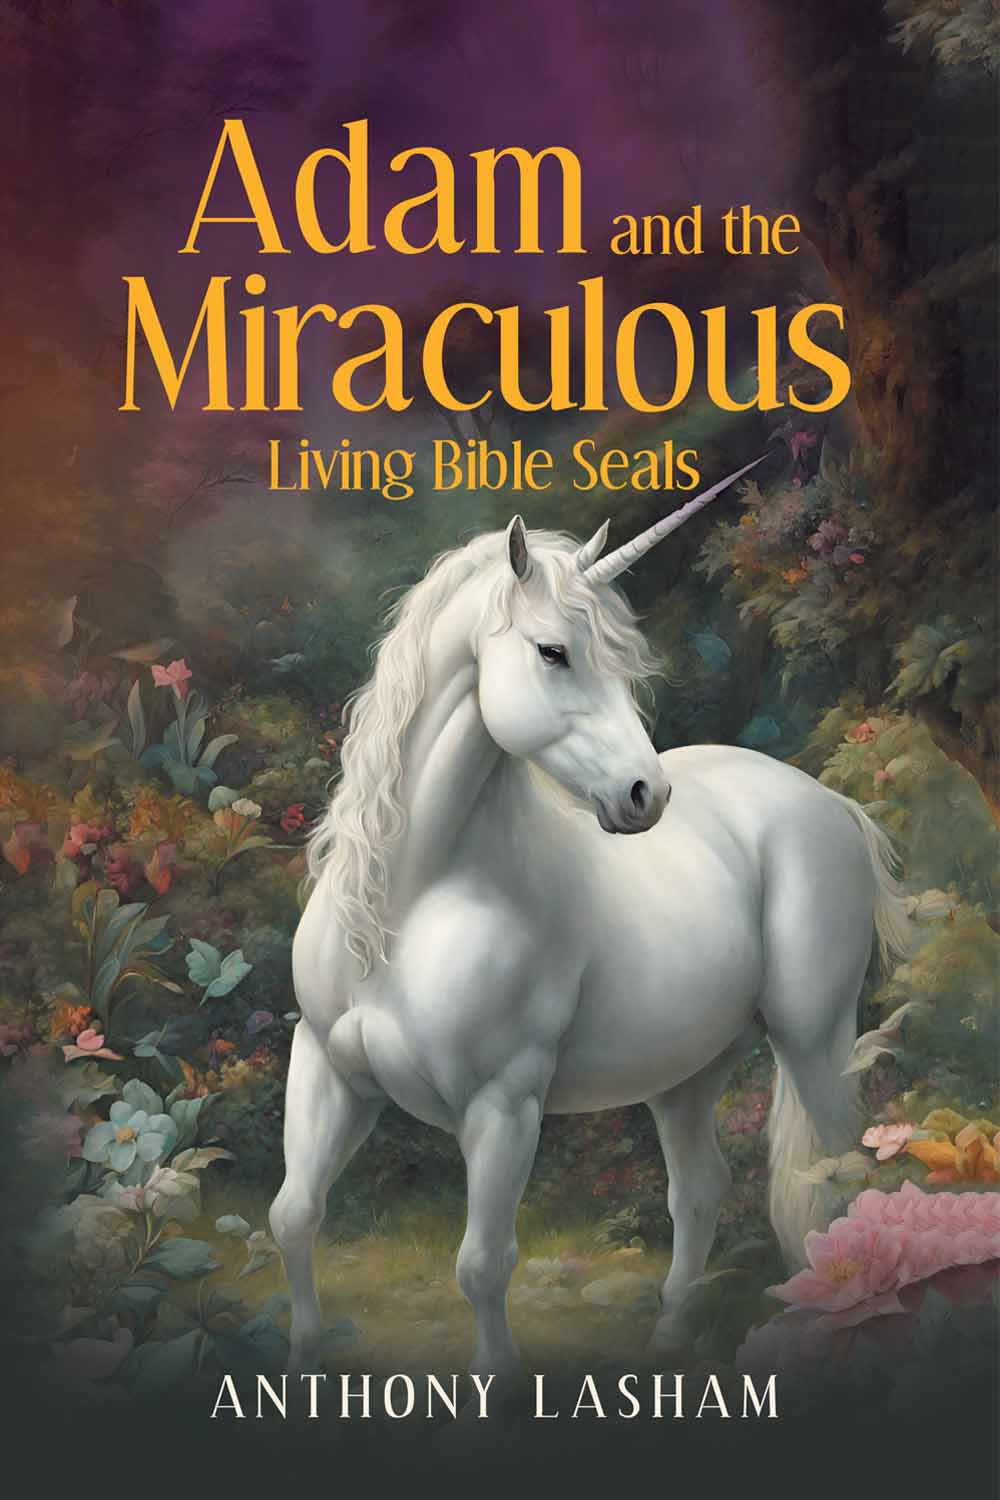 Adam and the Miraculous Living Bible Seals